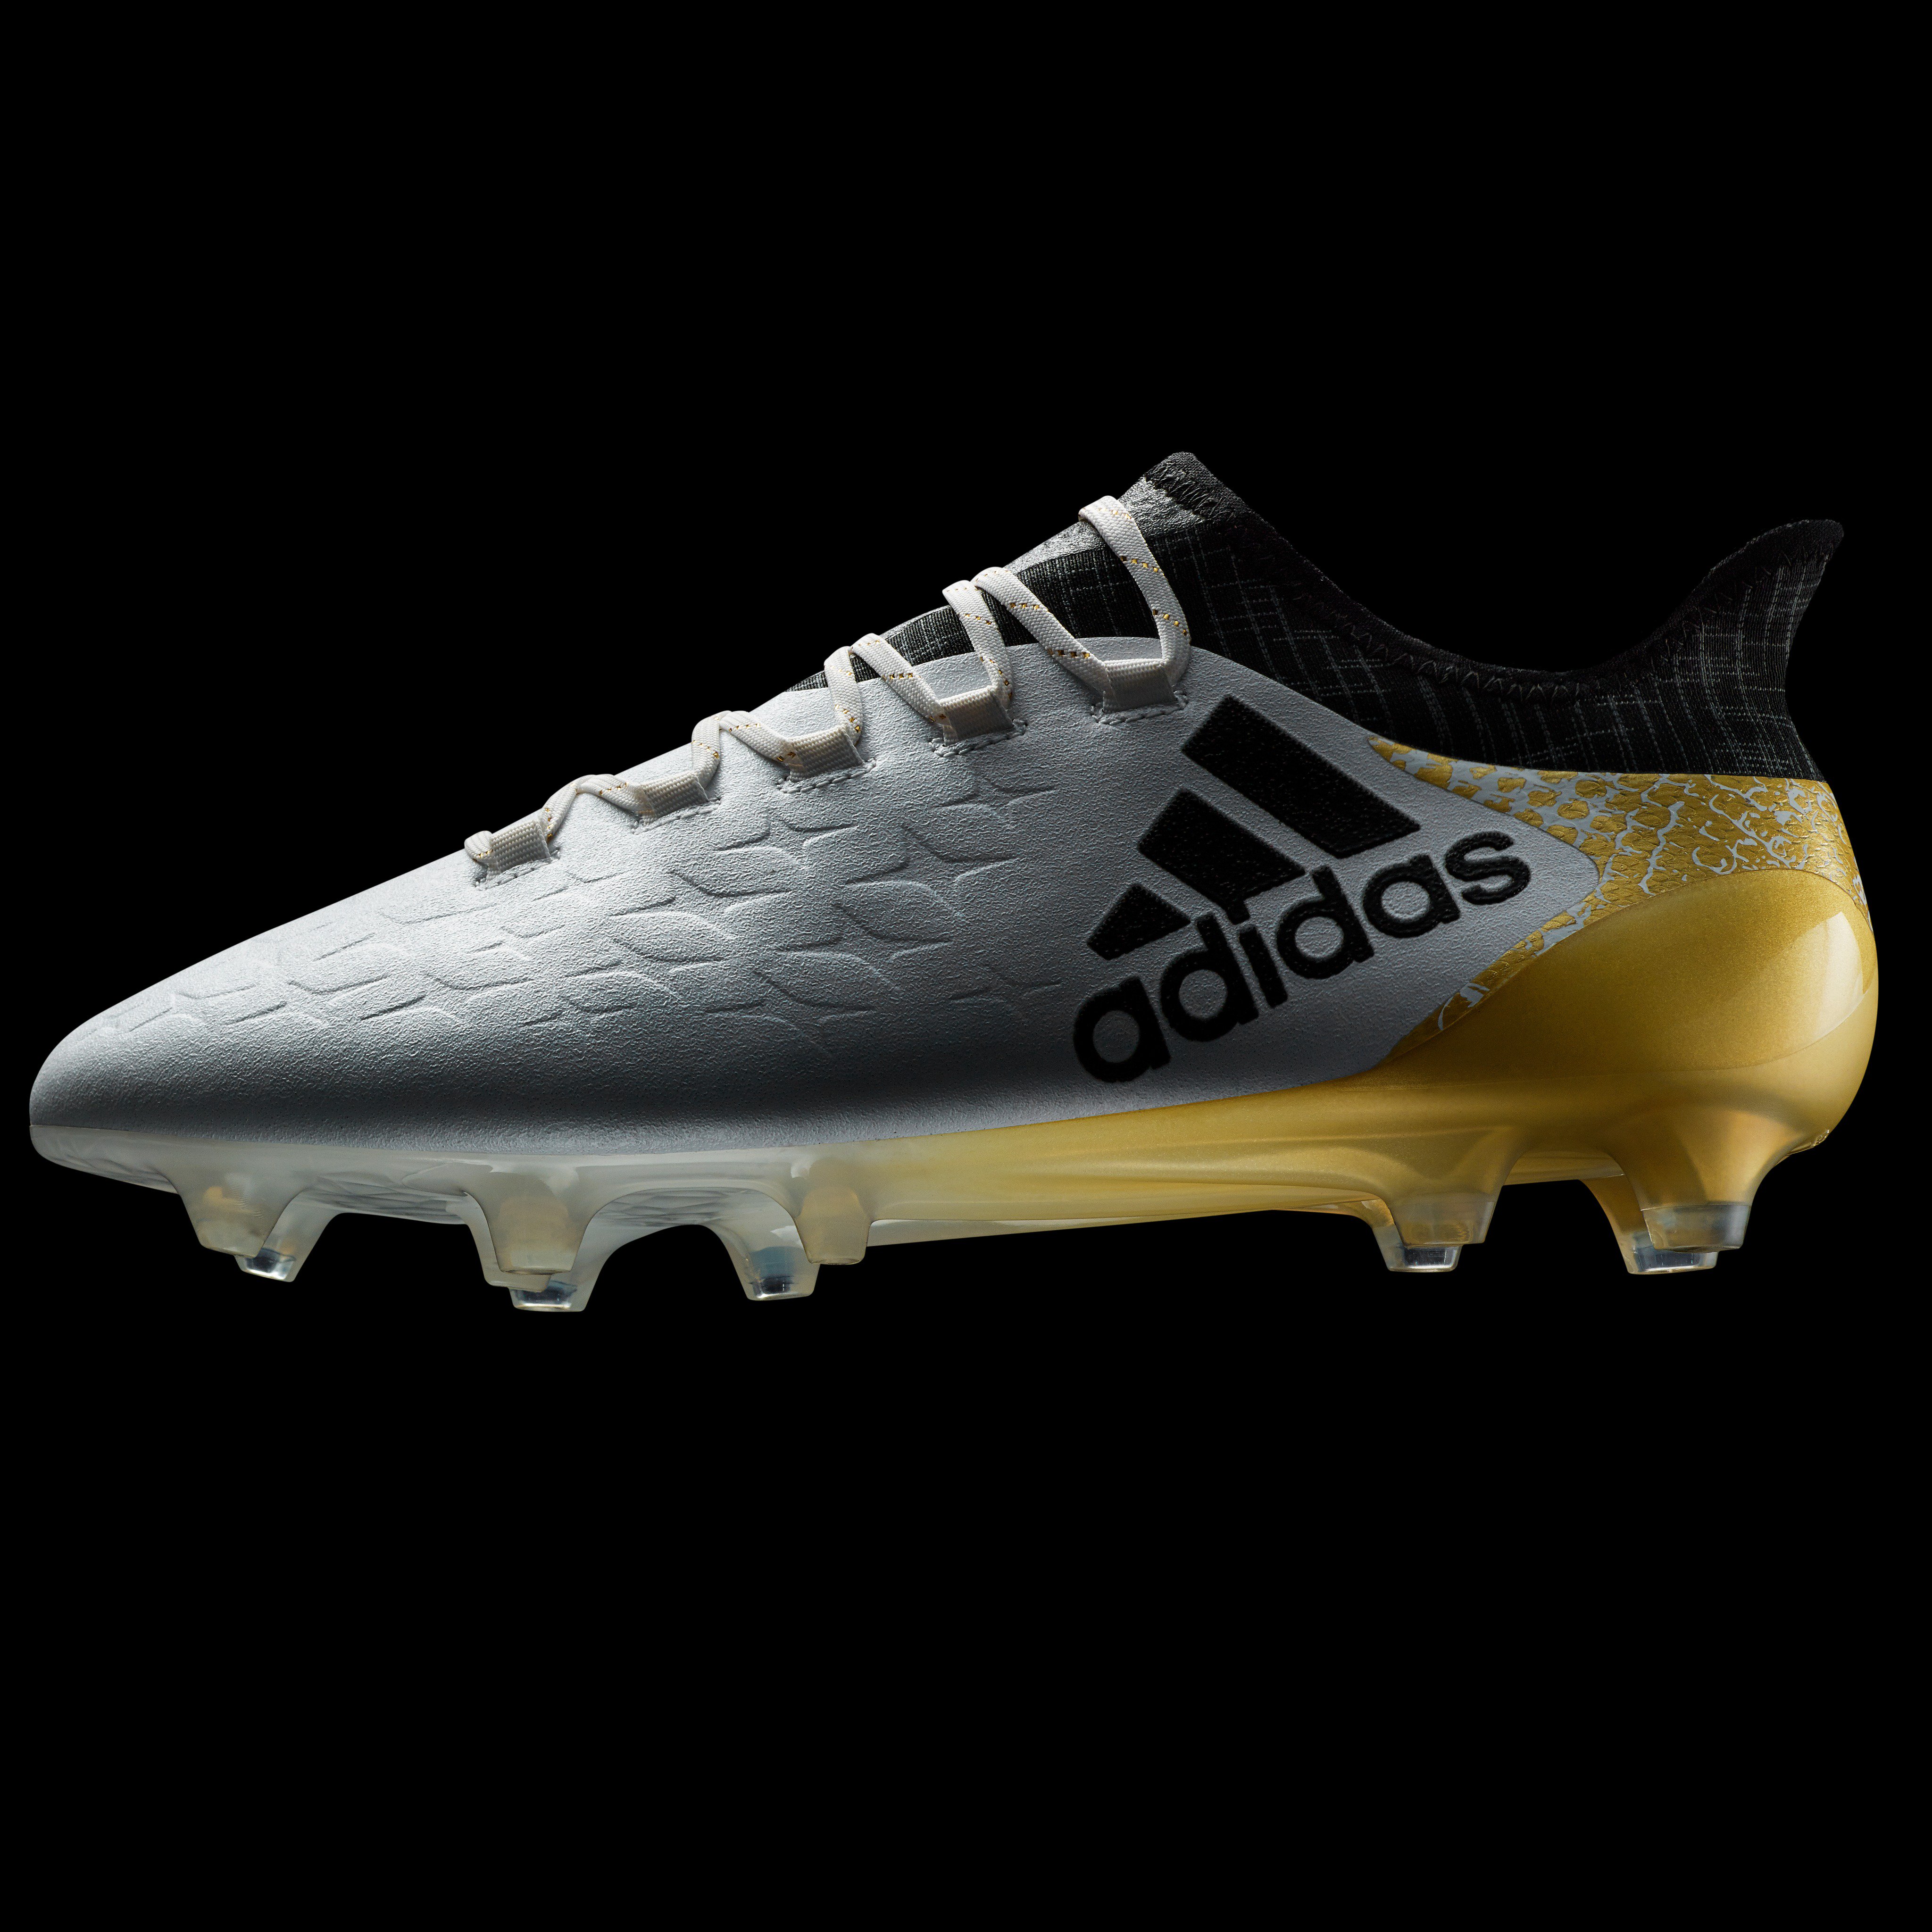 Intersport Elverys on Twitter: "White hot. The new Adidas #X16  #FirstNeverFollows 📸 Available in store + online &gt;&gt;  https://t.co/0WF8ymwIu7 https://t.co/hR67lLX3c1" / Twitter